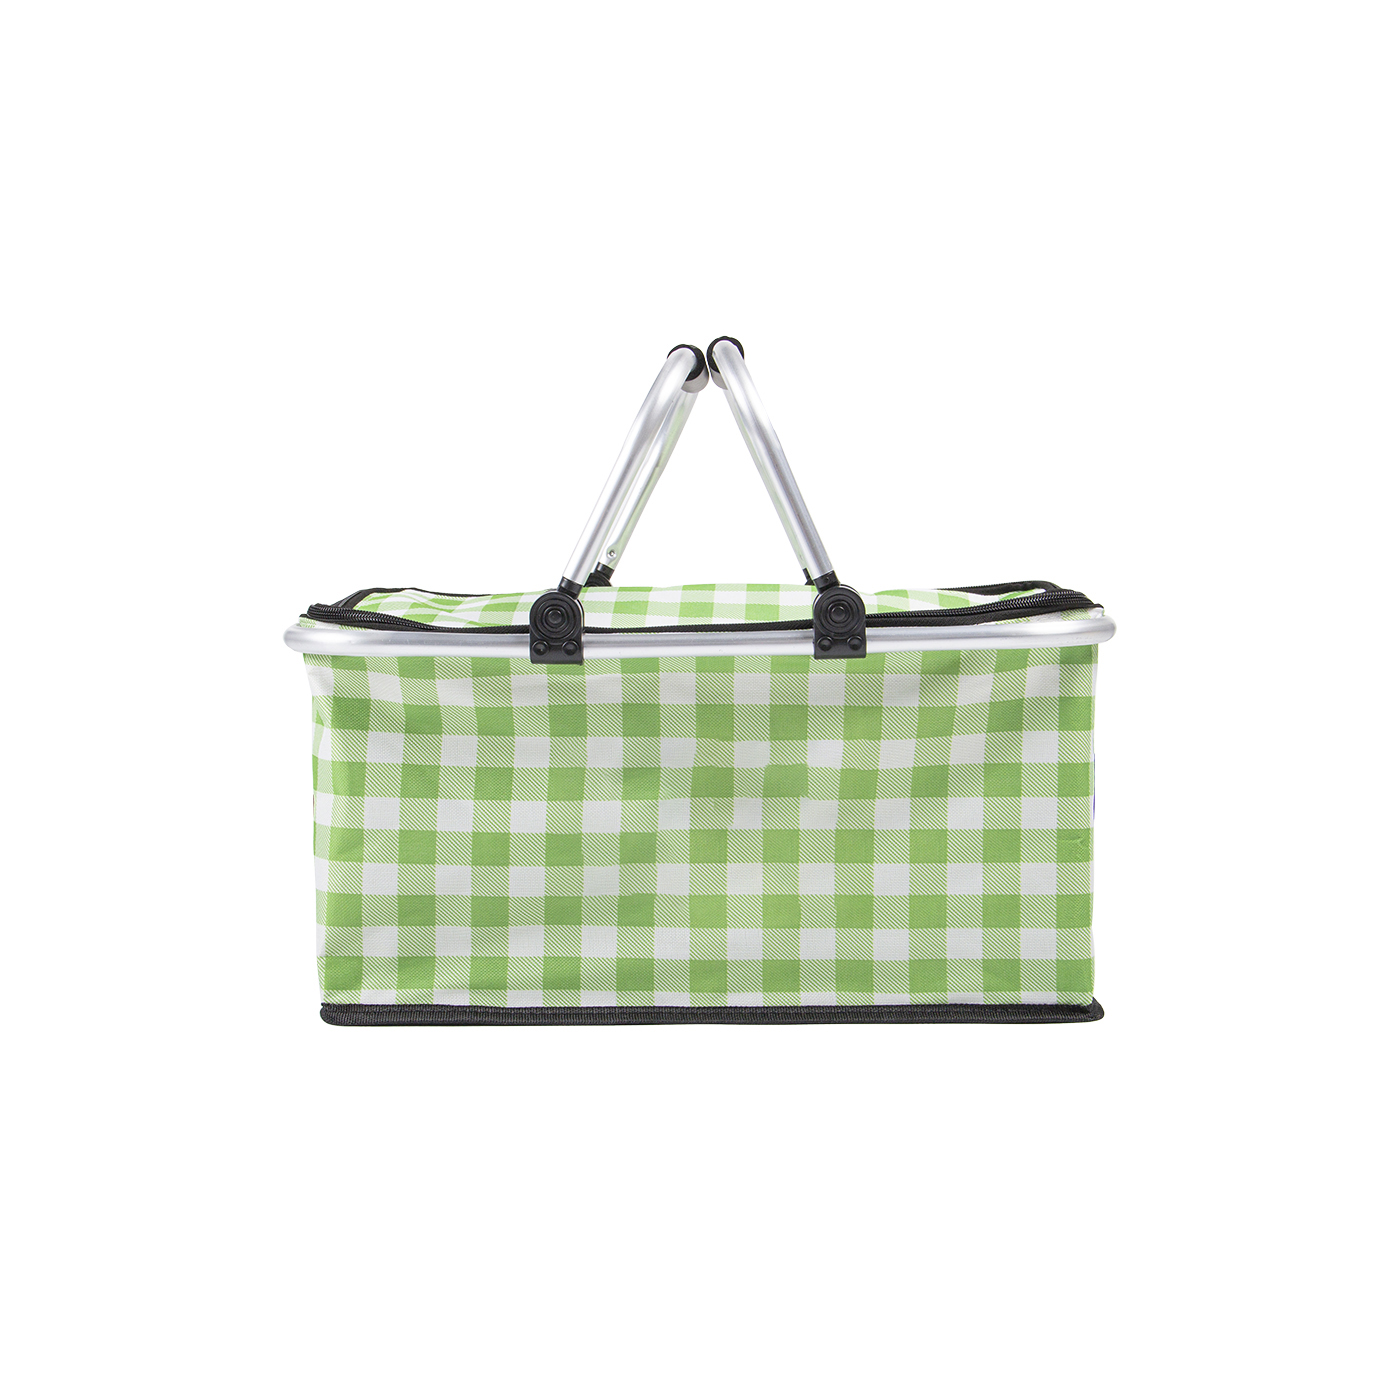 Foldable Insulated Picnic Basket1